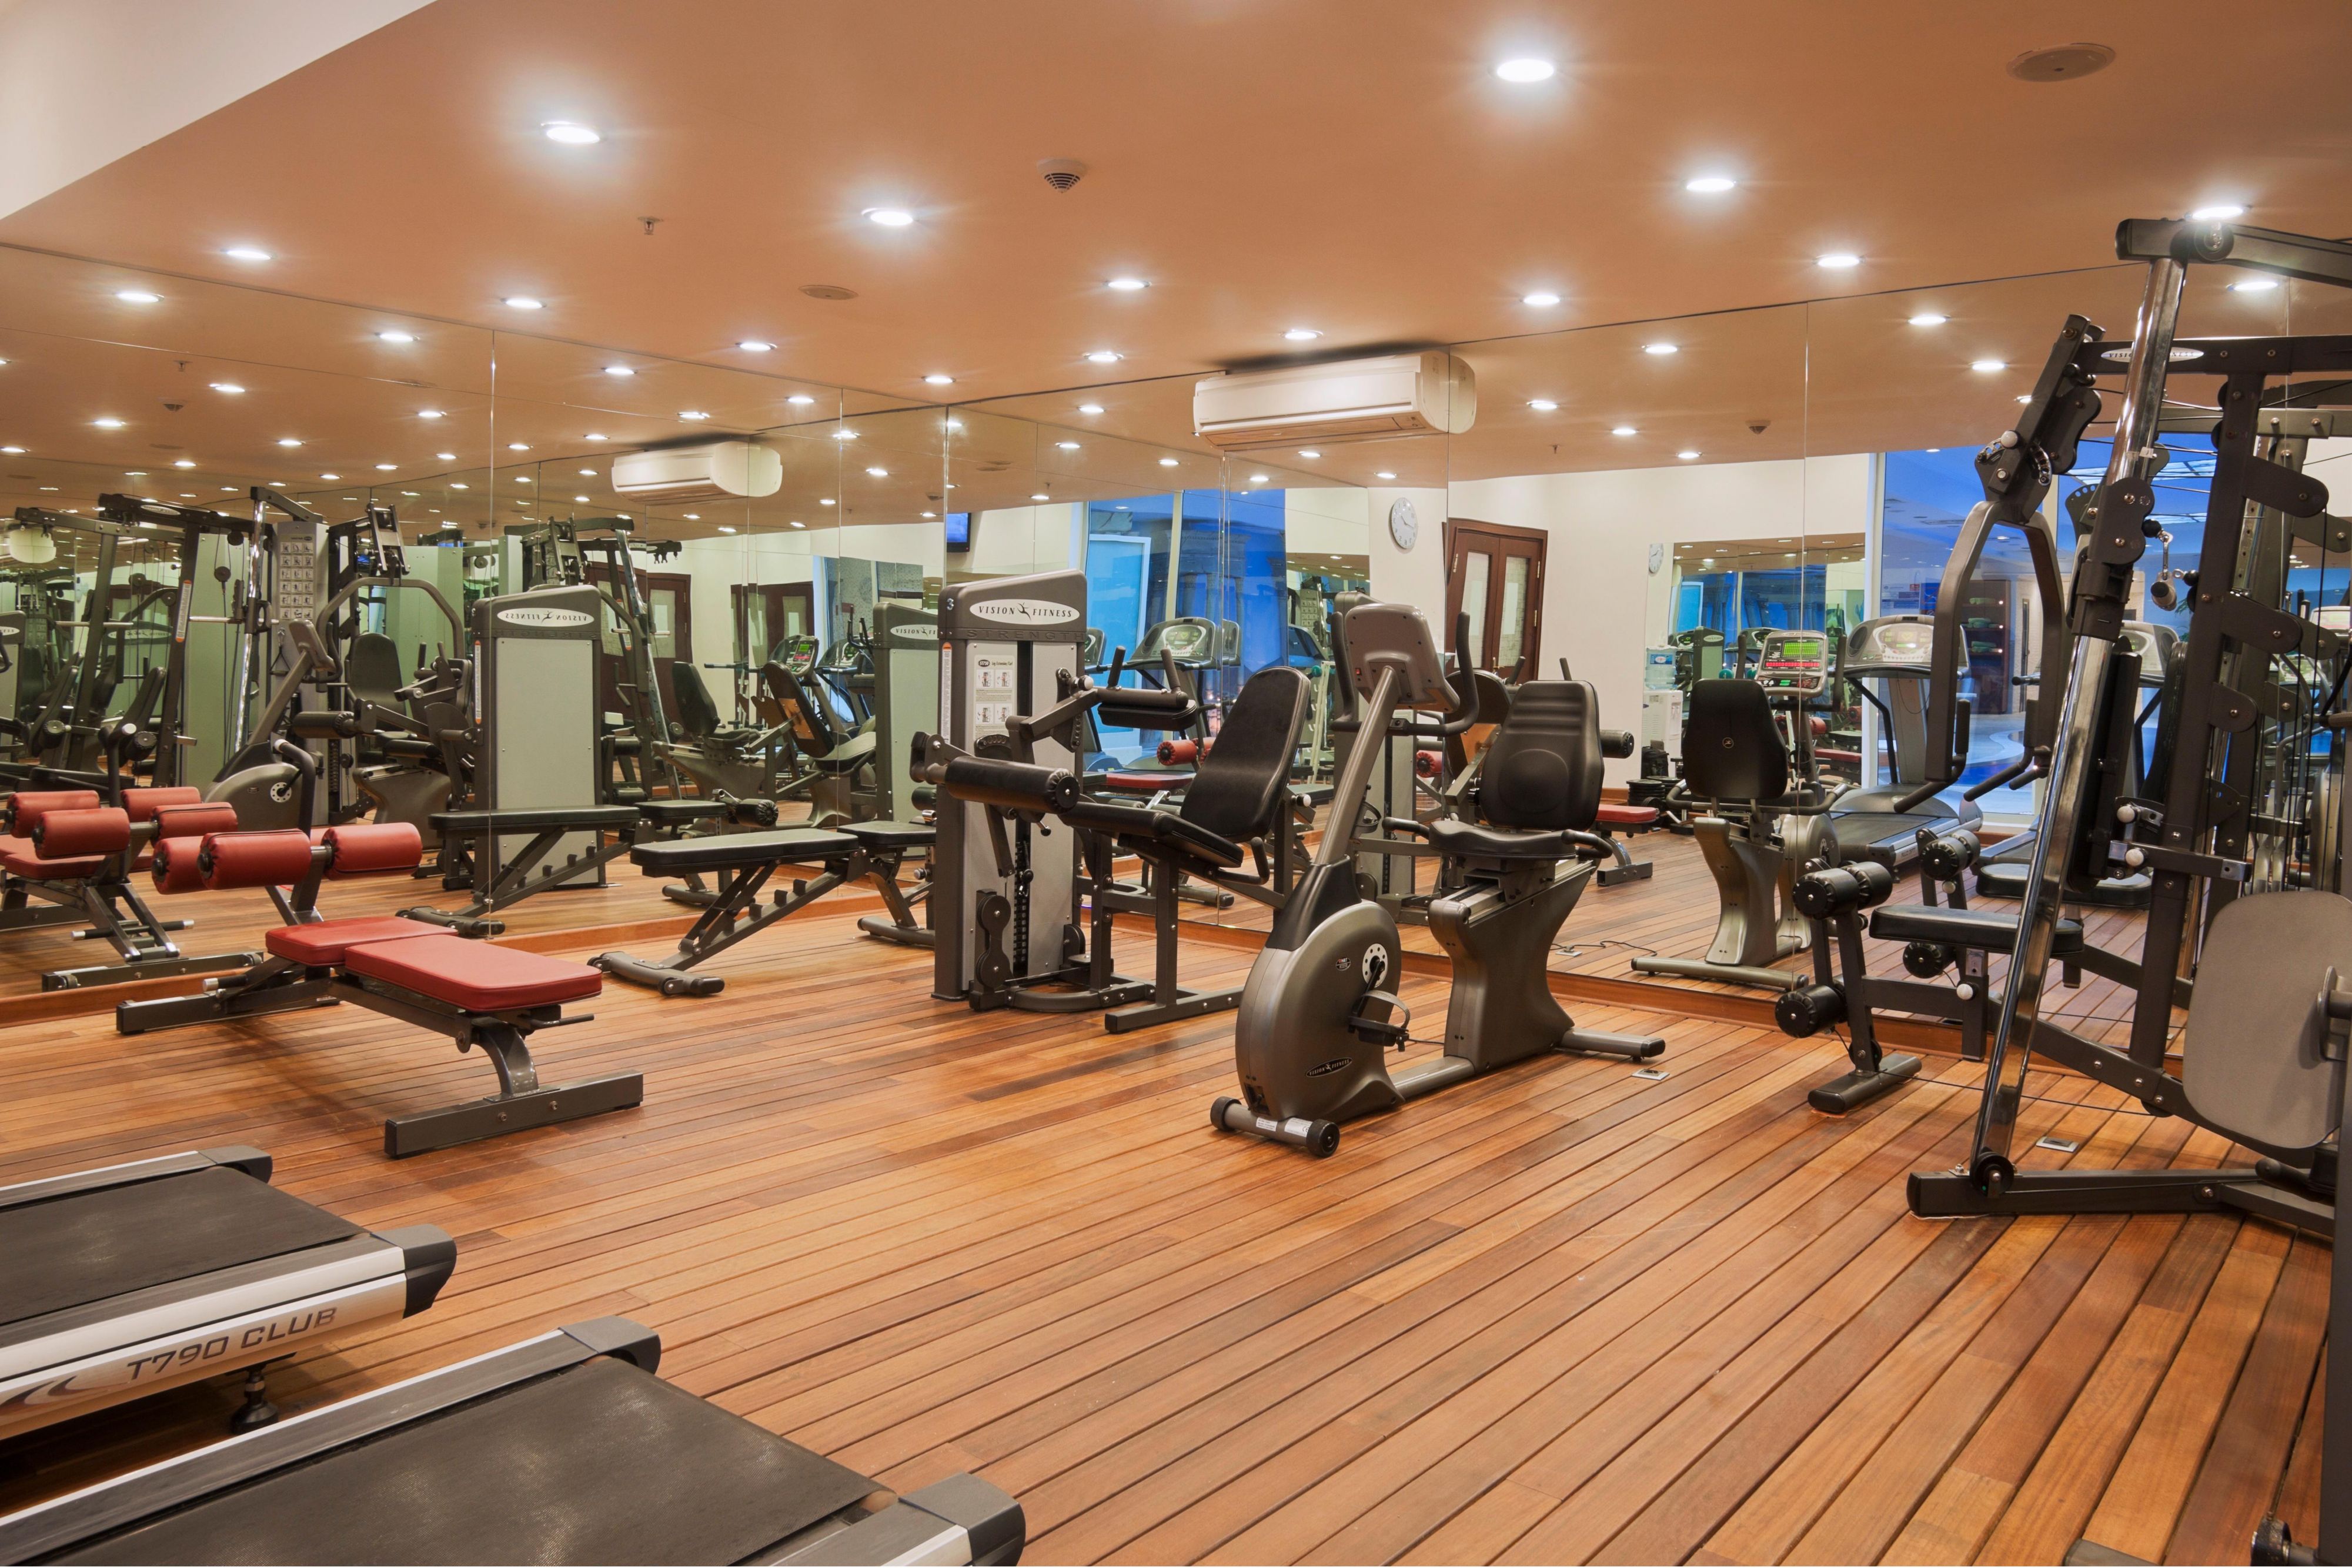 Well equipped Fitness Centre both for female and male guests